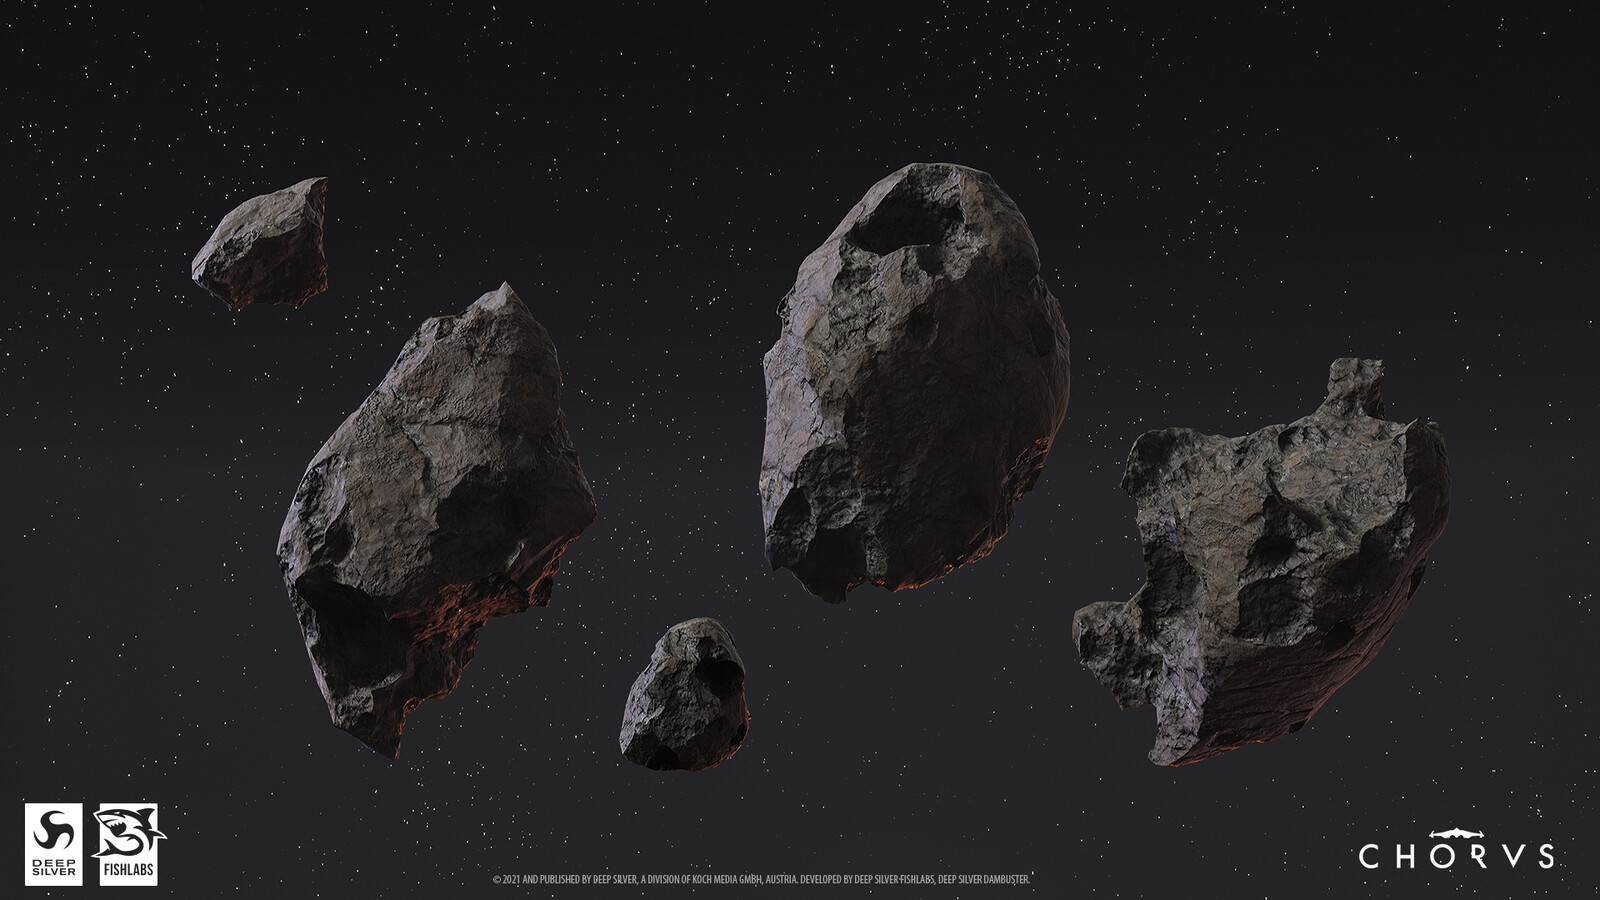 Medium and small asteroids